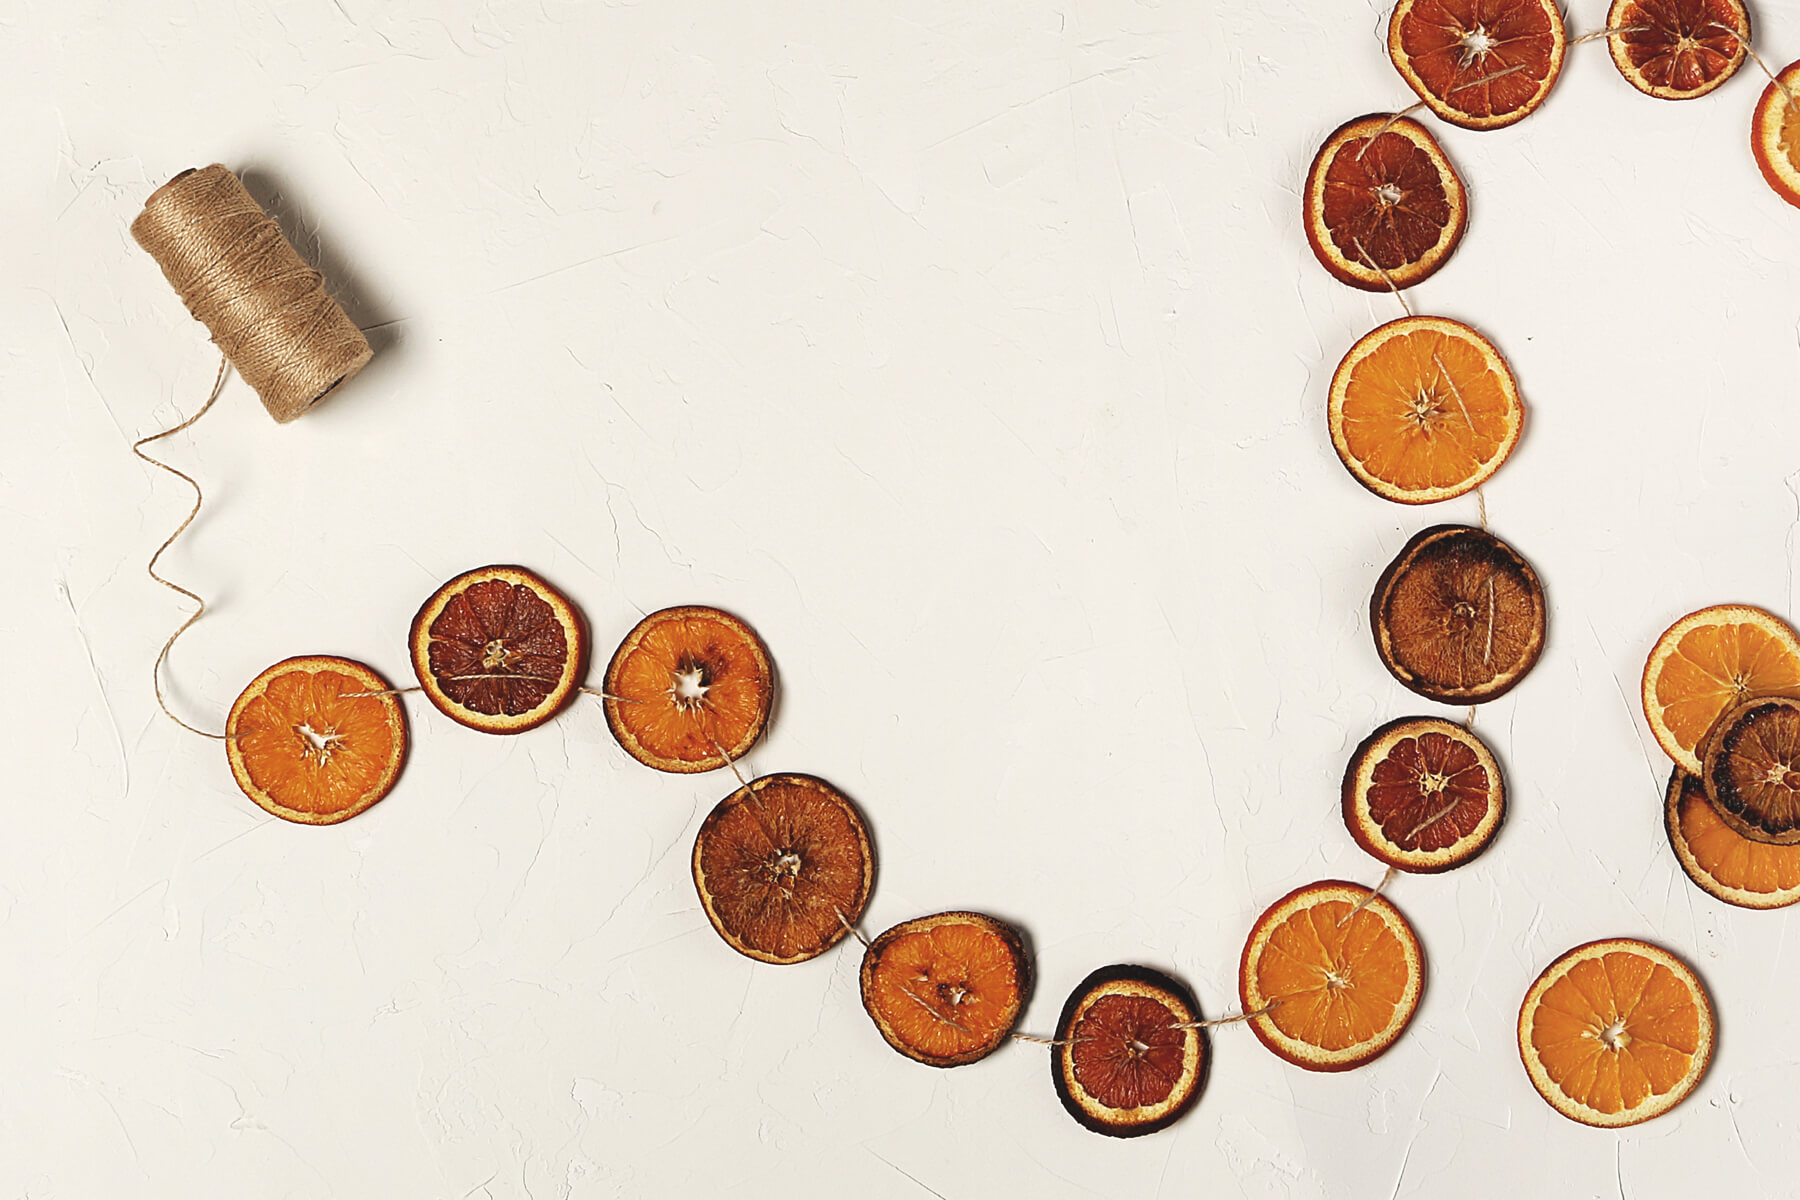 A citrus garland made of oranges and blood oranges.